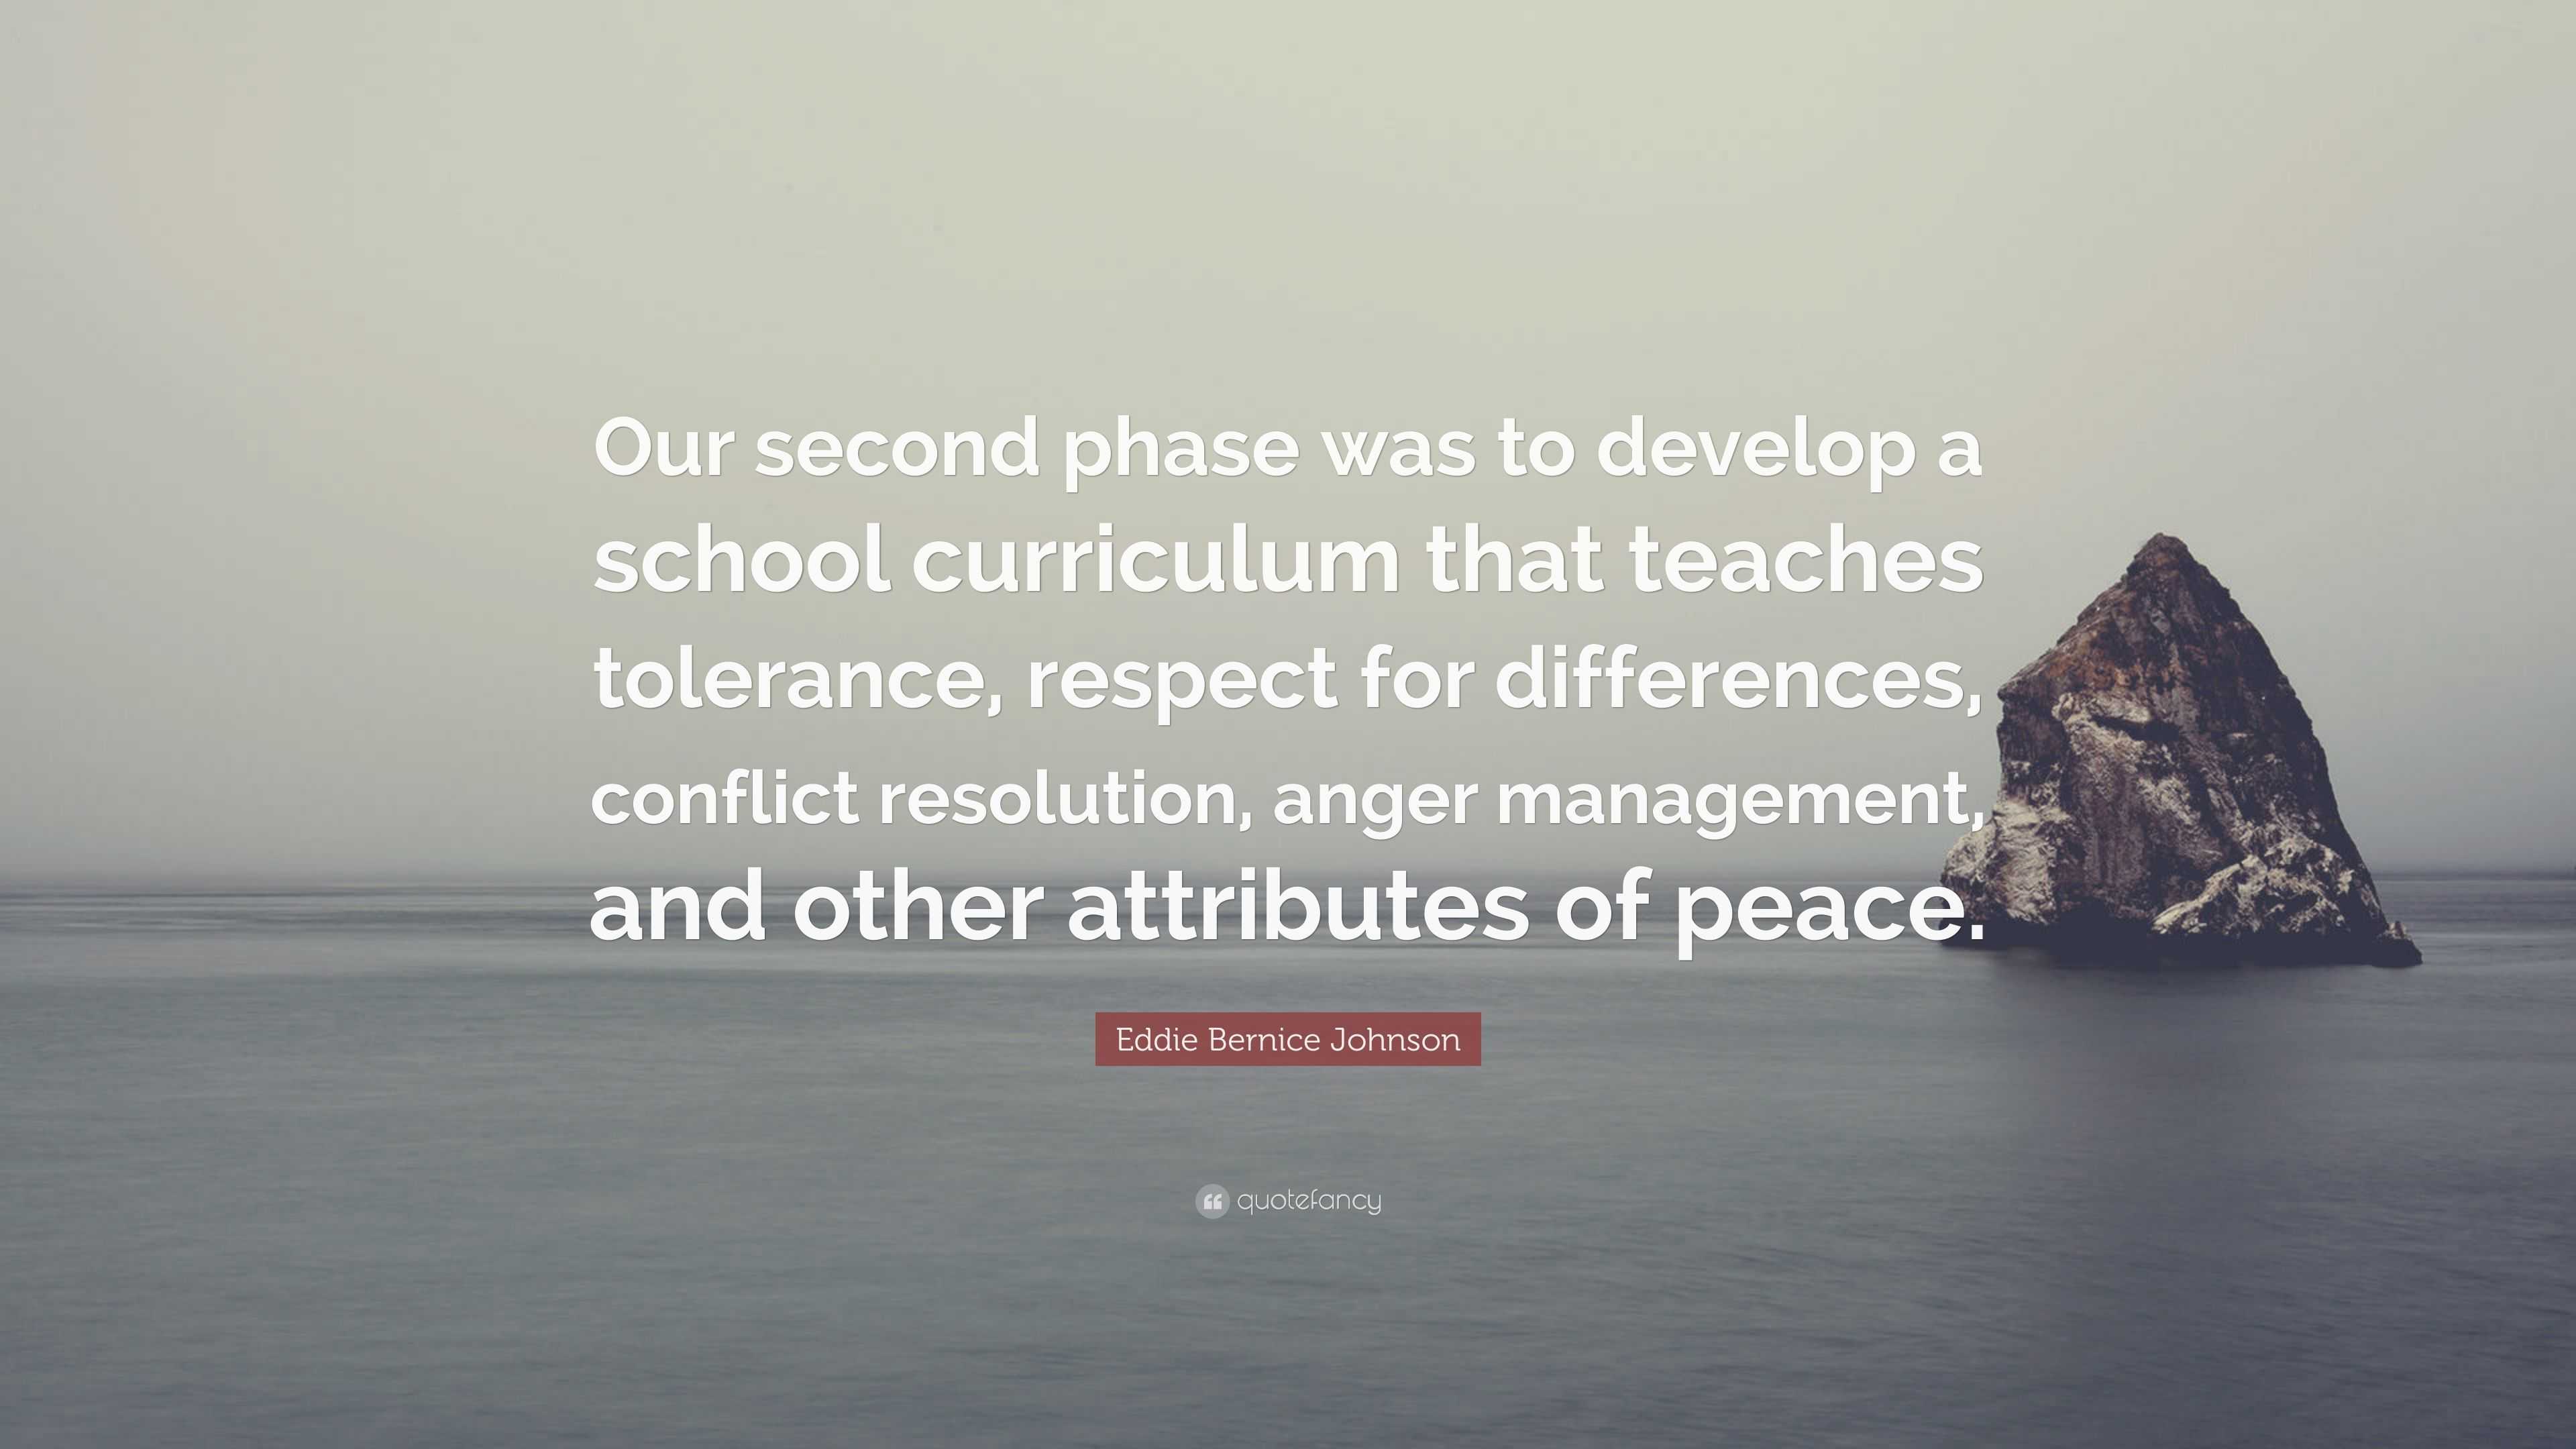 attributes of peace